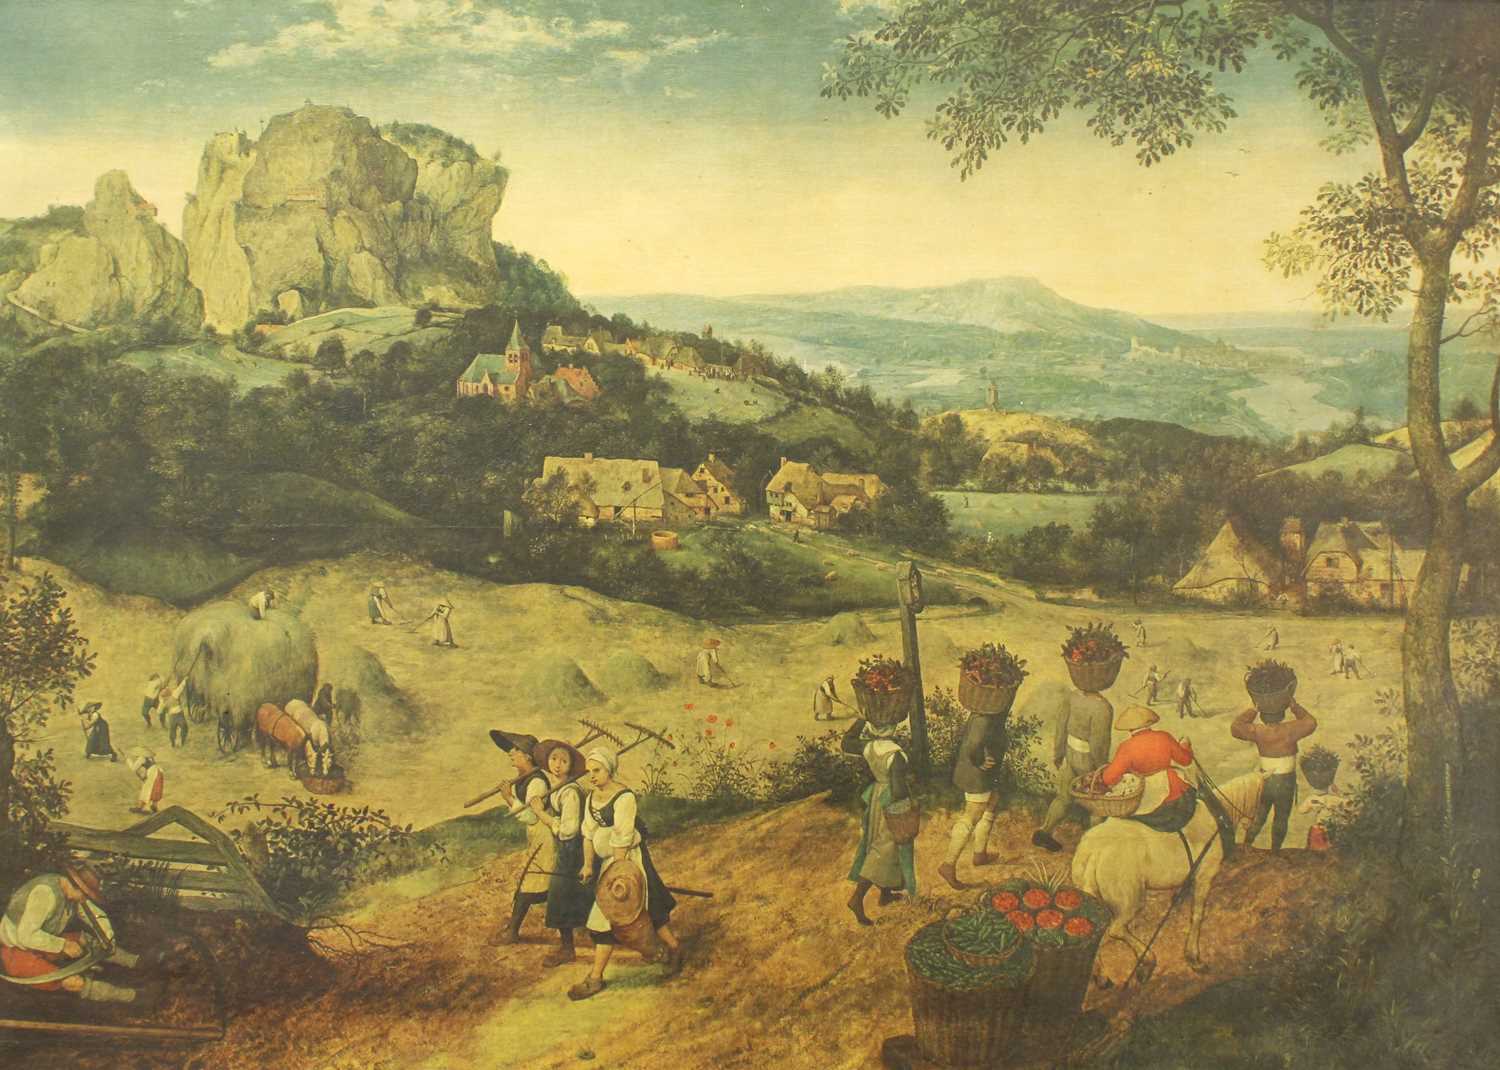 Decorative Pictures and Prints, including a reroduction after Pieter Bruegel, "The Hay Harvest"; two